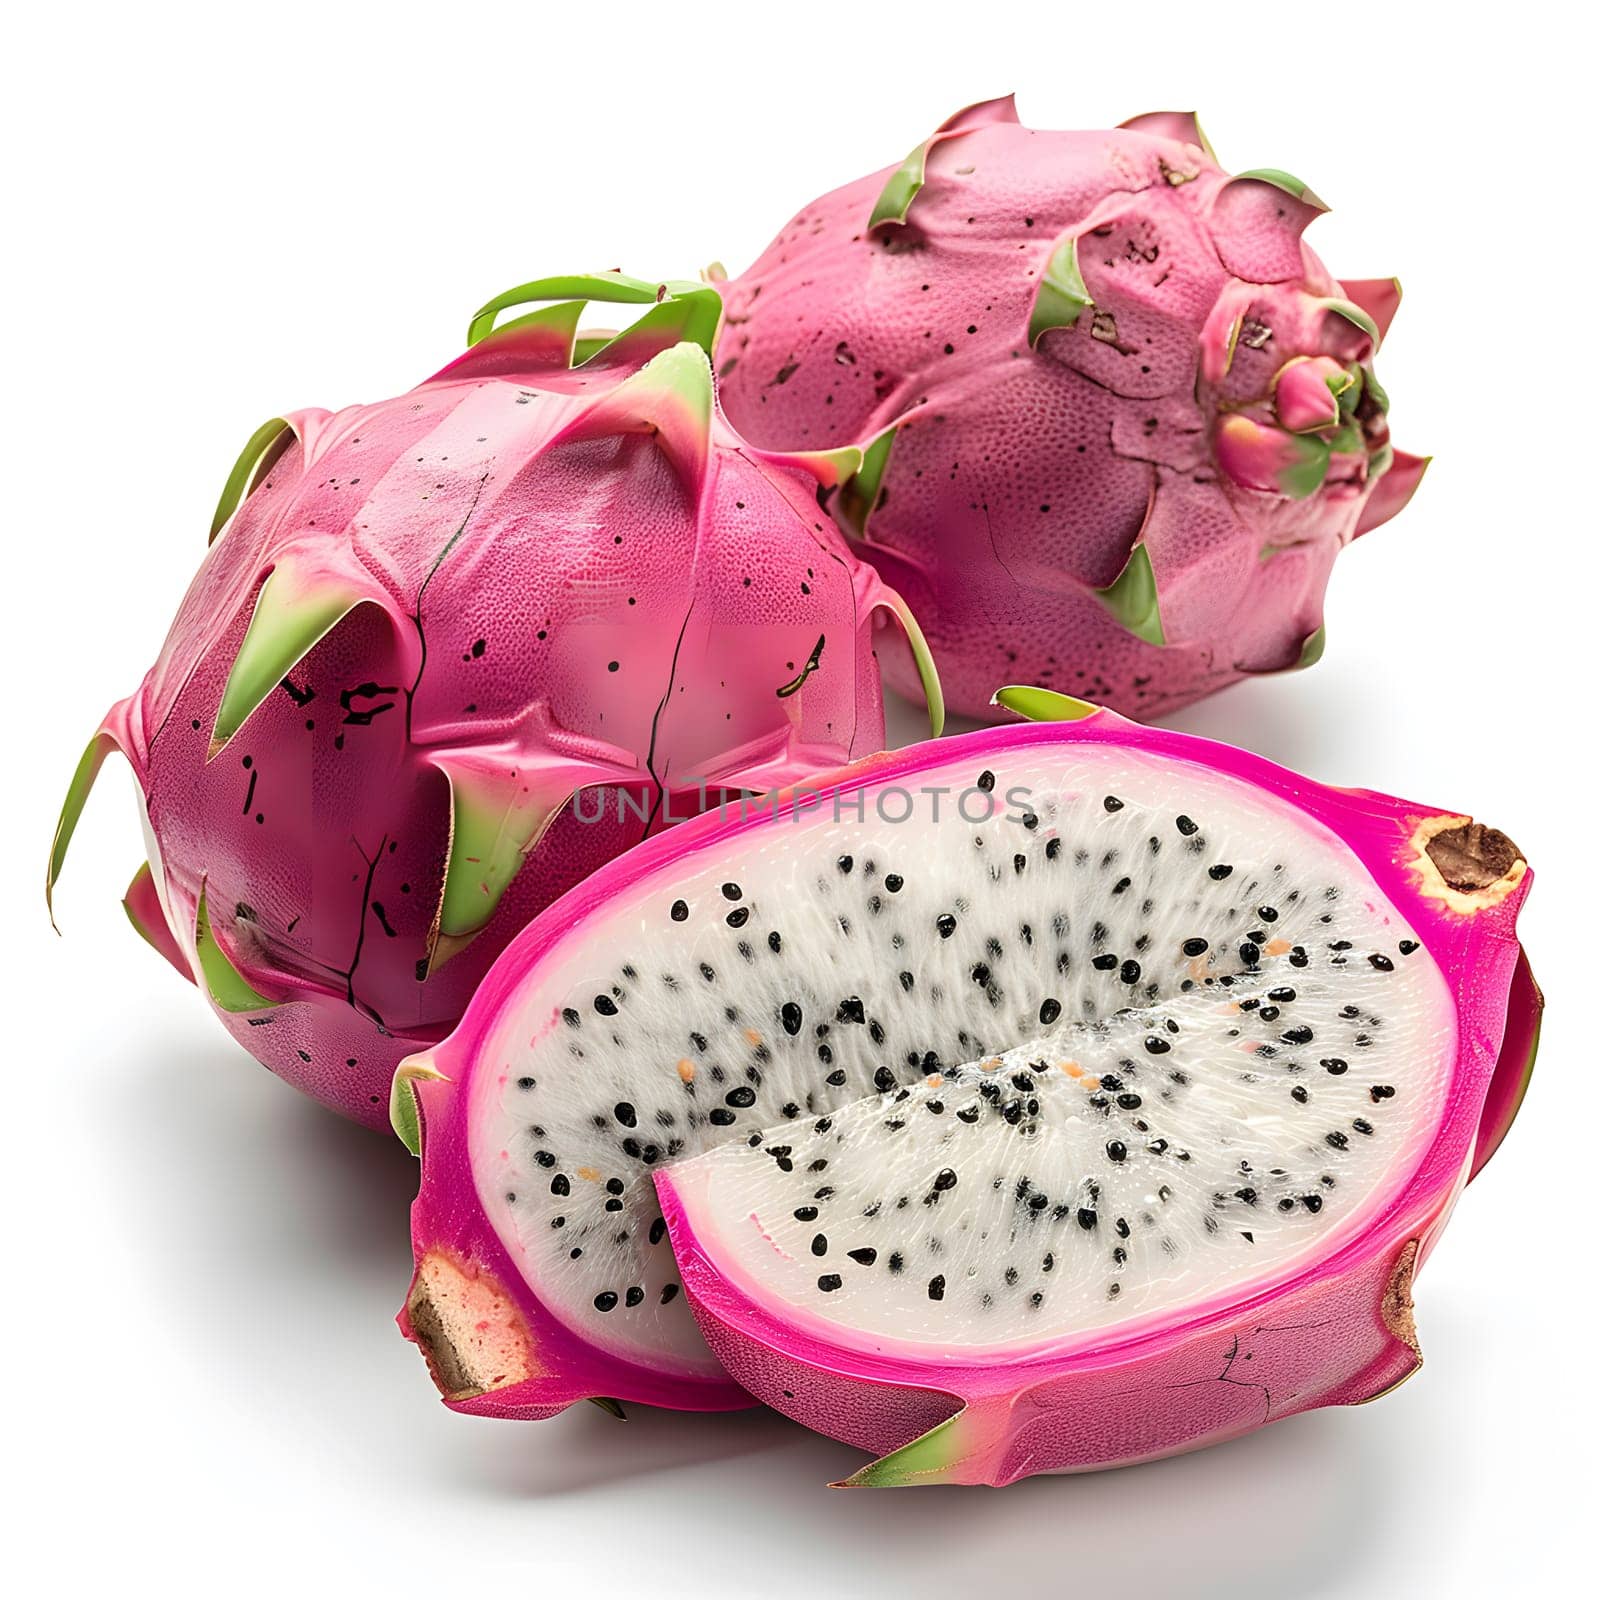 Watch a pink Costa Rican pitahaya, also known as Dragonfruit or Pitahaya, cut in half on a white background. This terrestrial plant is a popular ingredient in natural foods